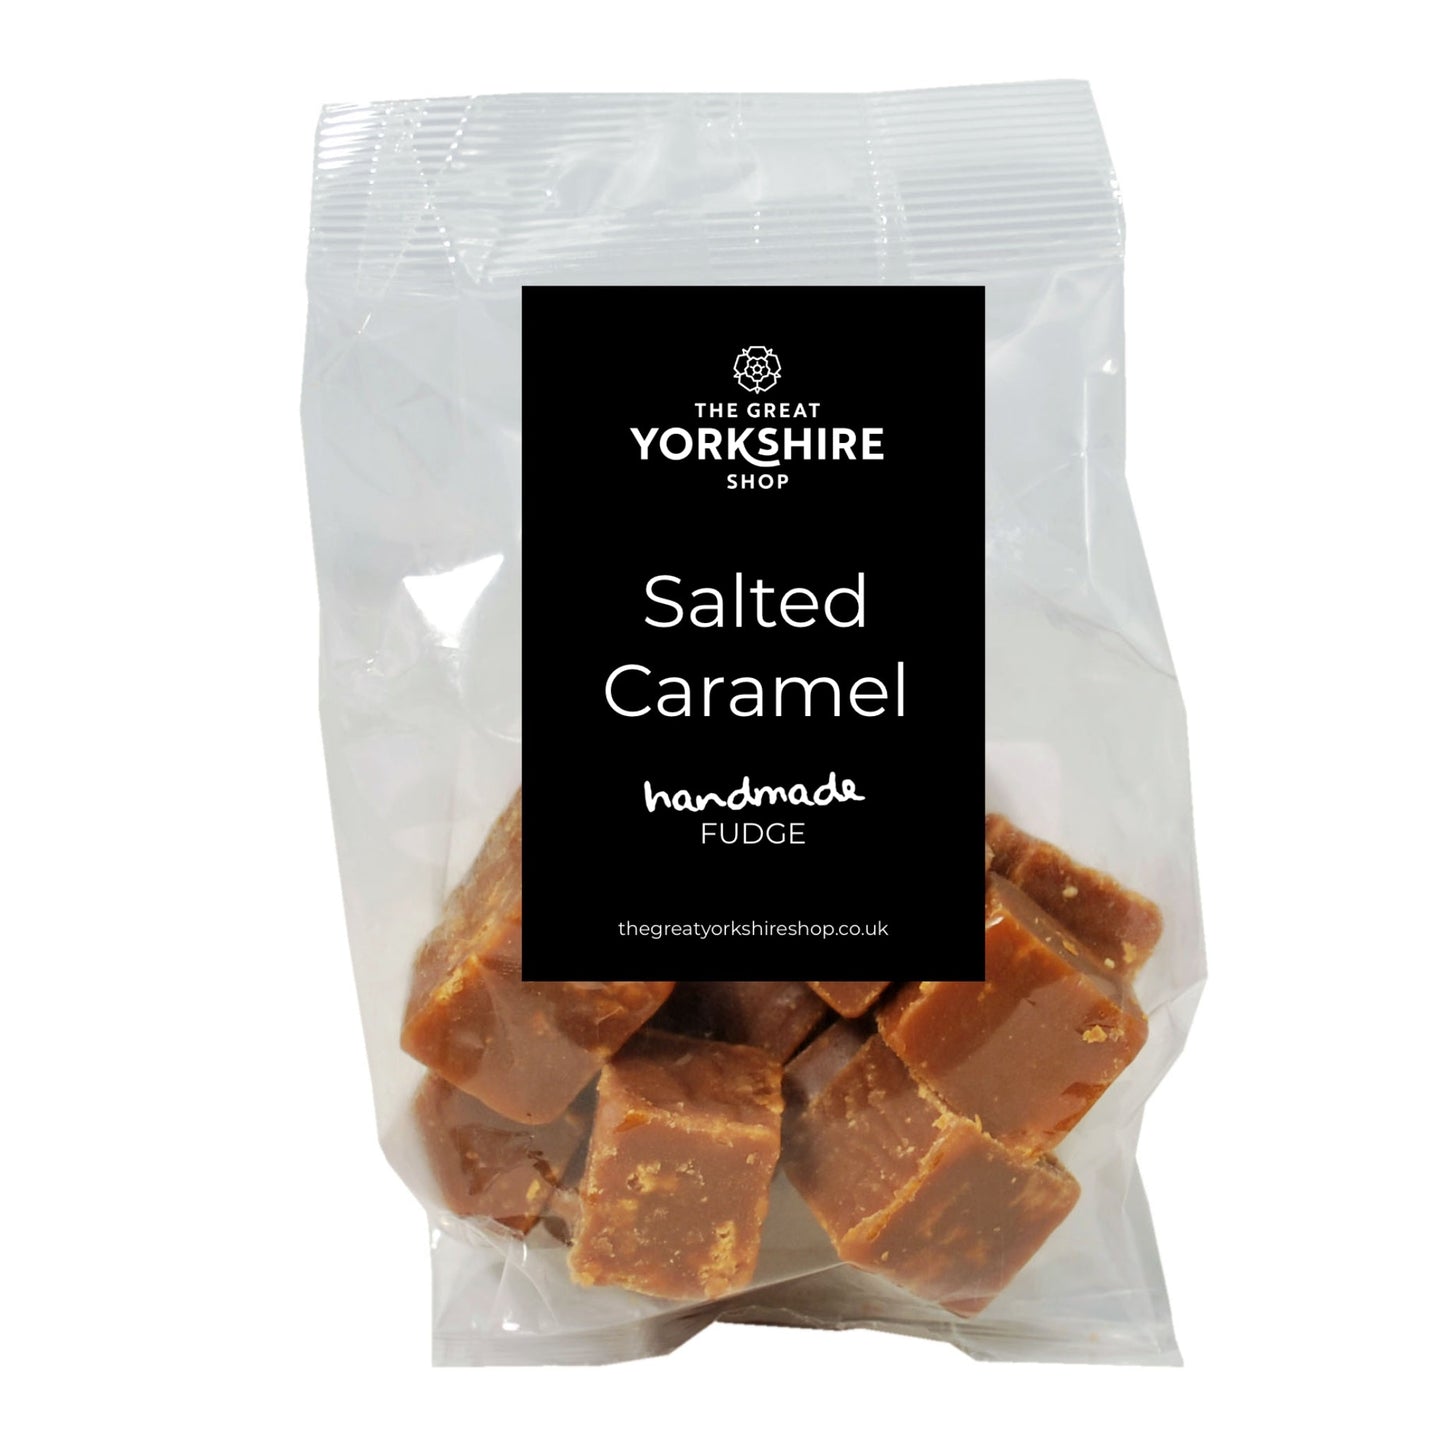 Load image into Gallery viewer, Salted Caramel Handmade Fudge - The Great Yorkshire Shop
